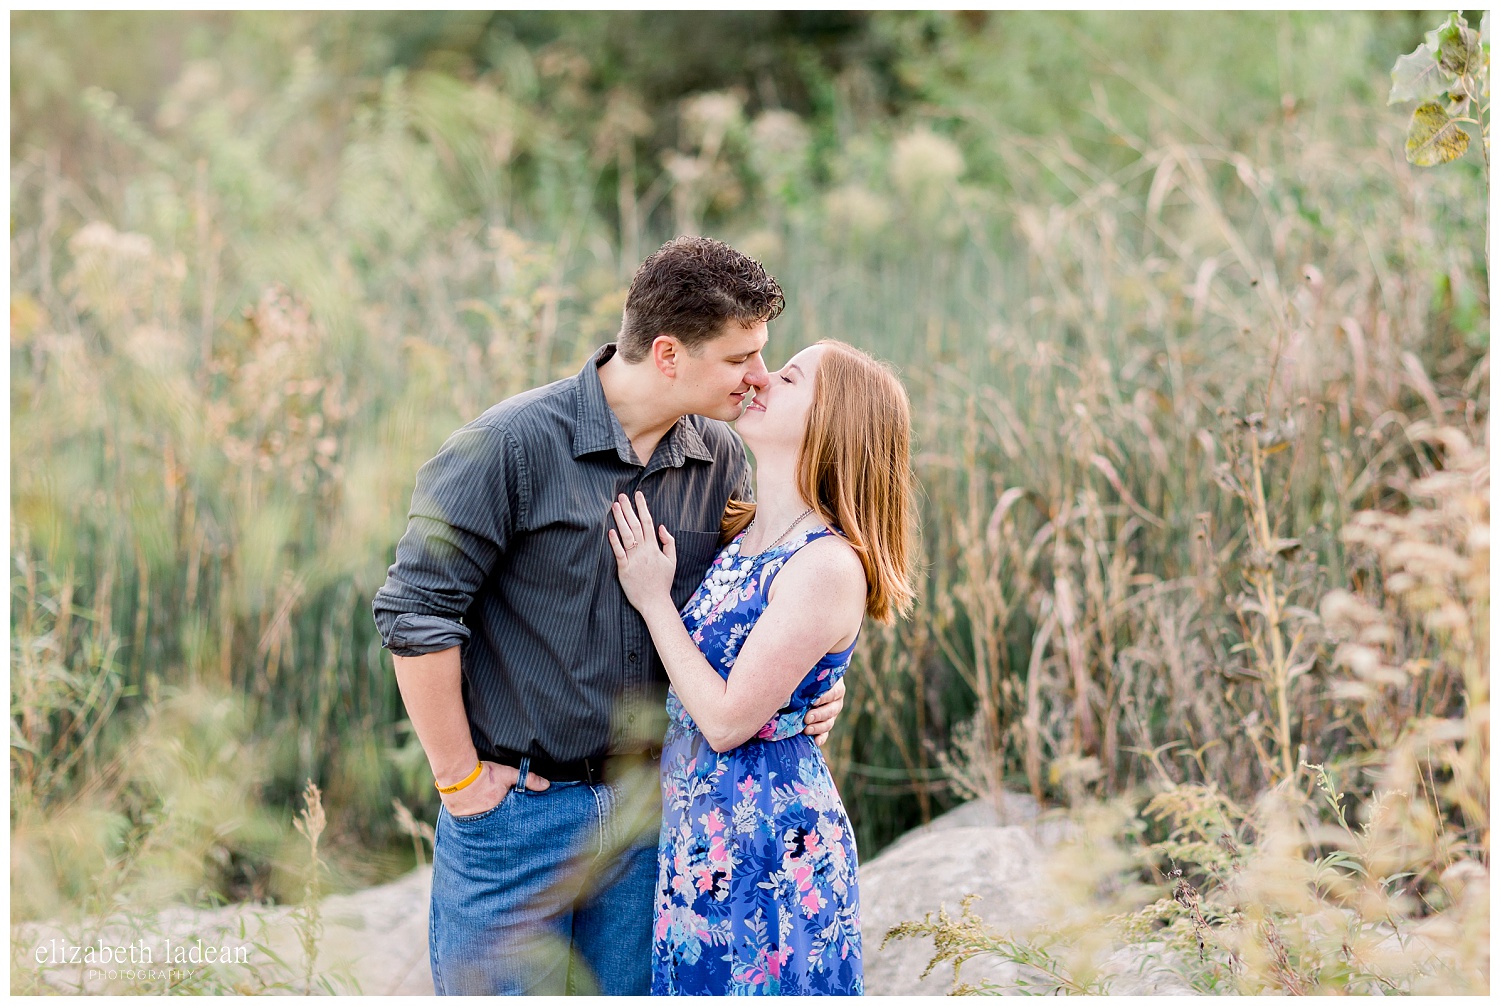 Northland-KC-Fall-Engagement-Photos-with-dog-A+B-2018-elizabeth-ladean-photography-photo_1502.jpg